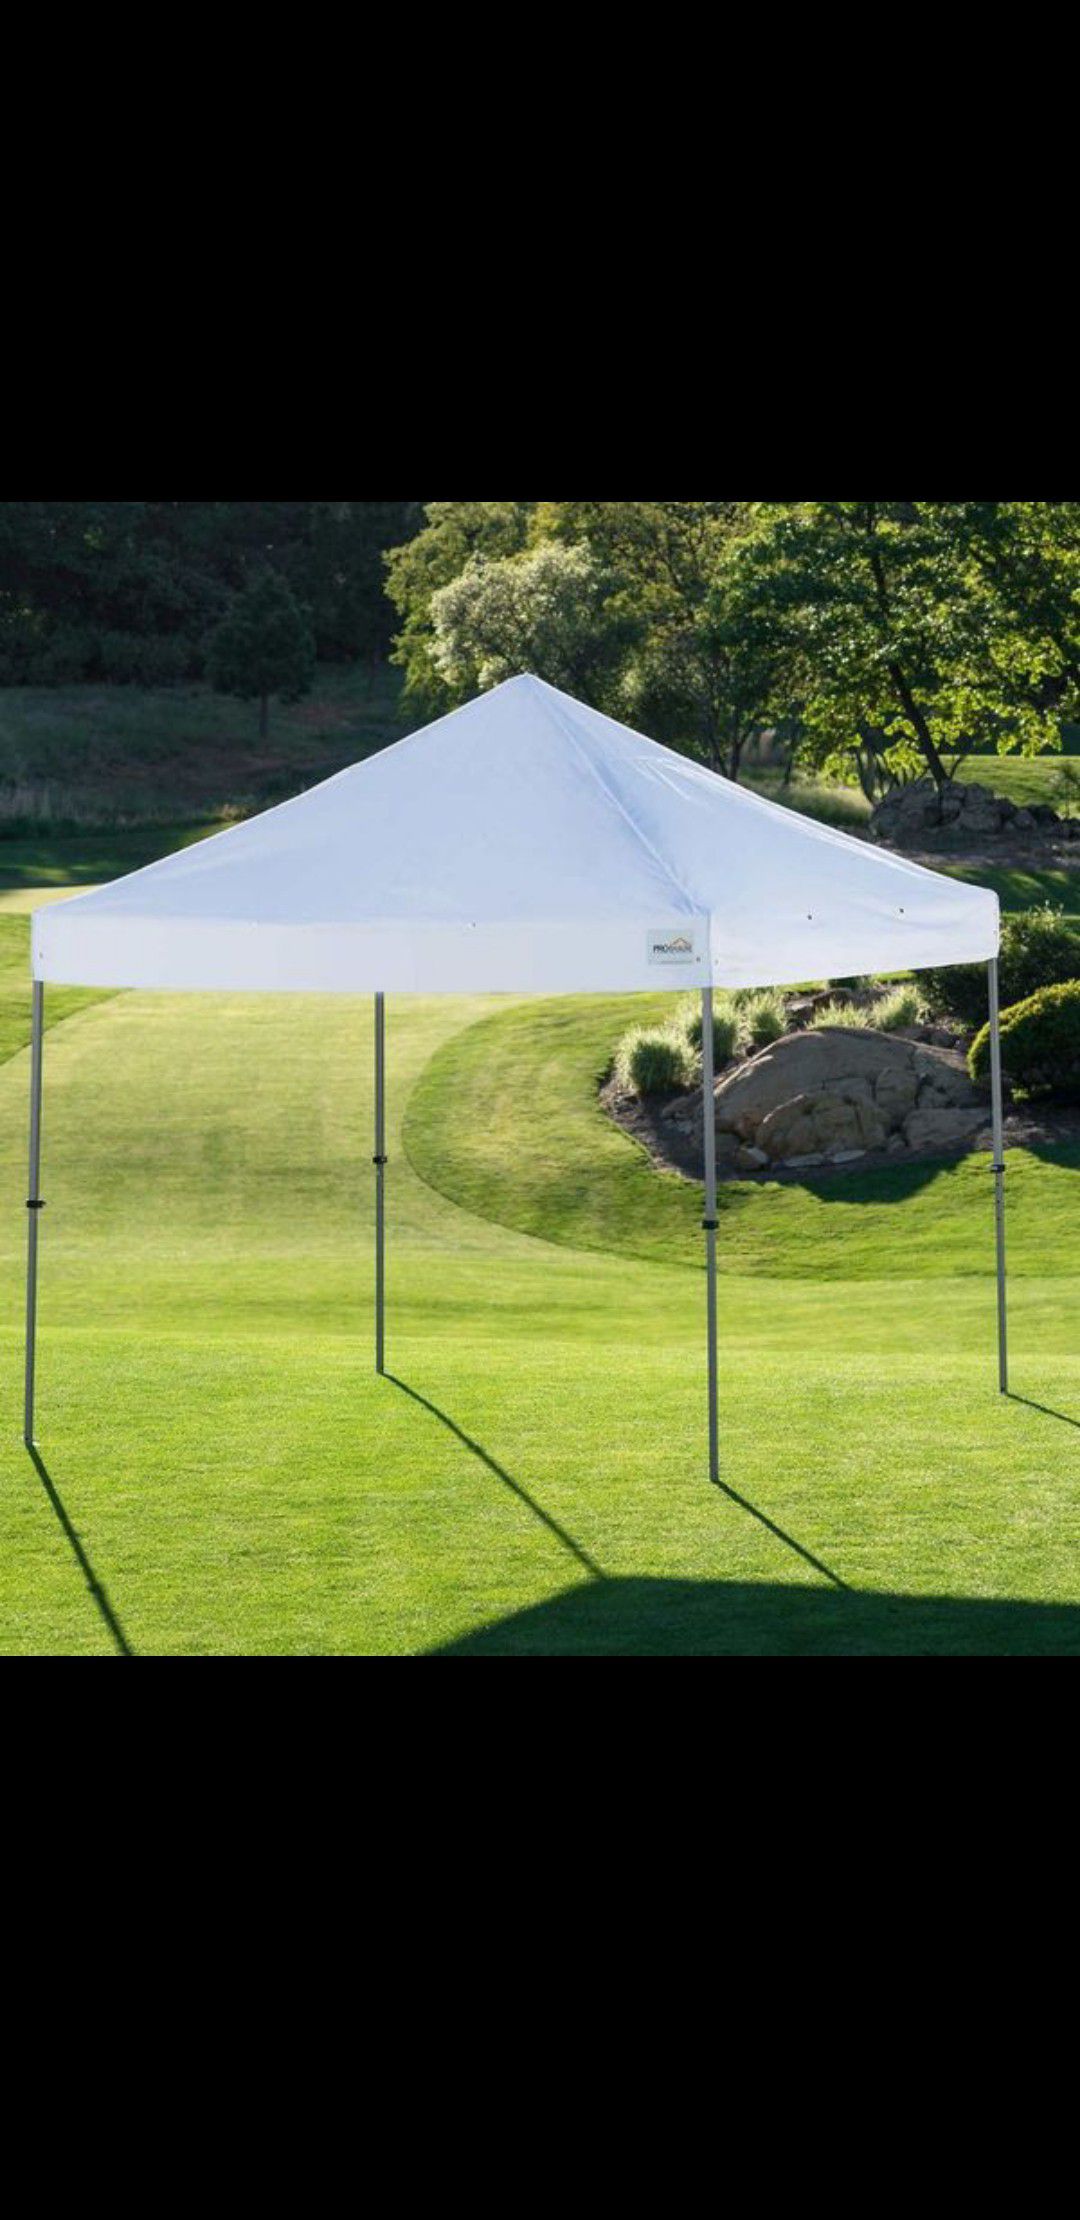 Outdoor - Beach Tent - Camping Tent - Party Backyard Tent